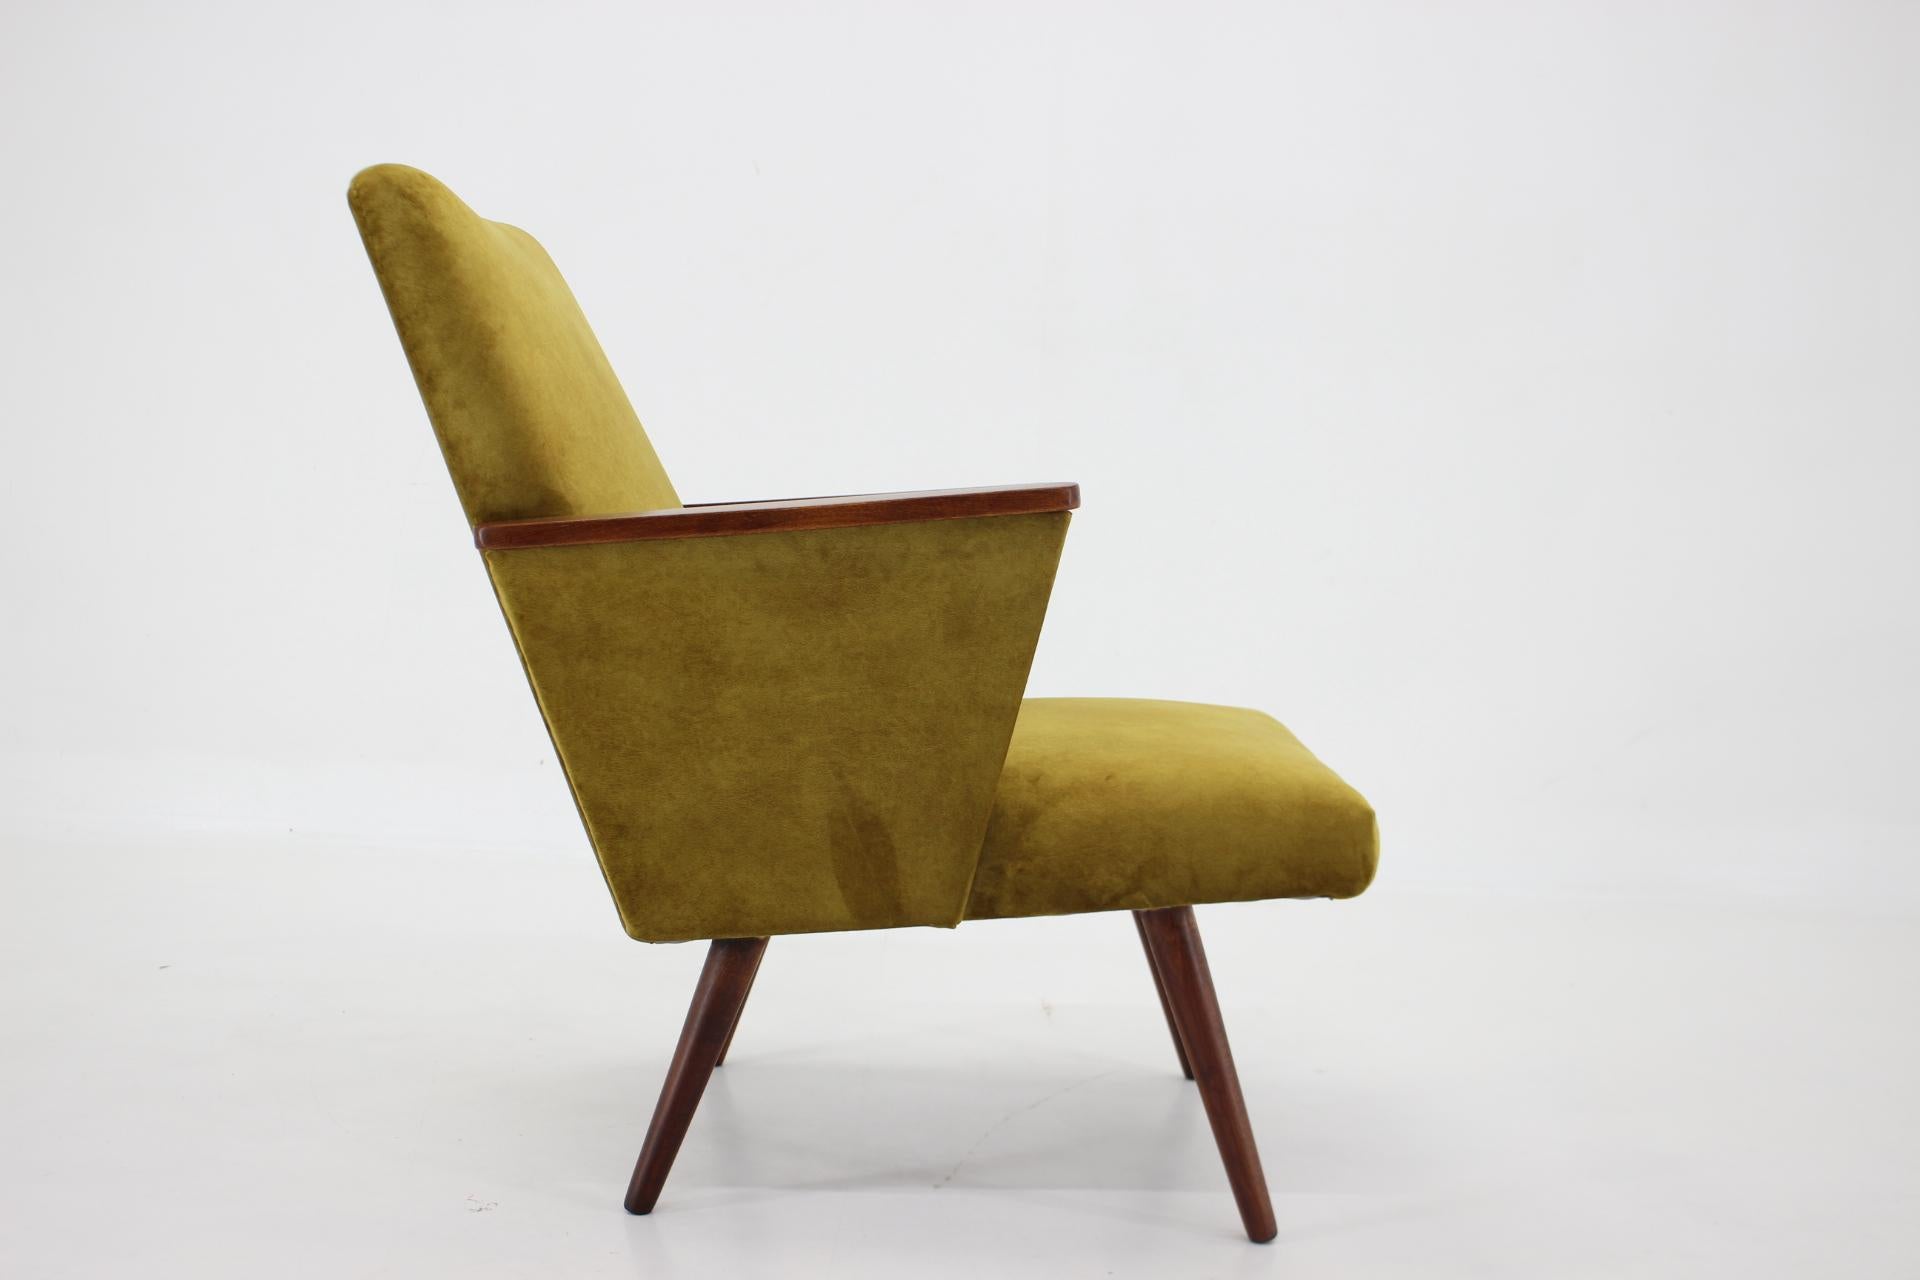 - newly upholstered
- refurbished 
- mustard color fabric with easy clean technology 
- height of seat 37 cm.